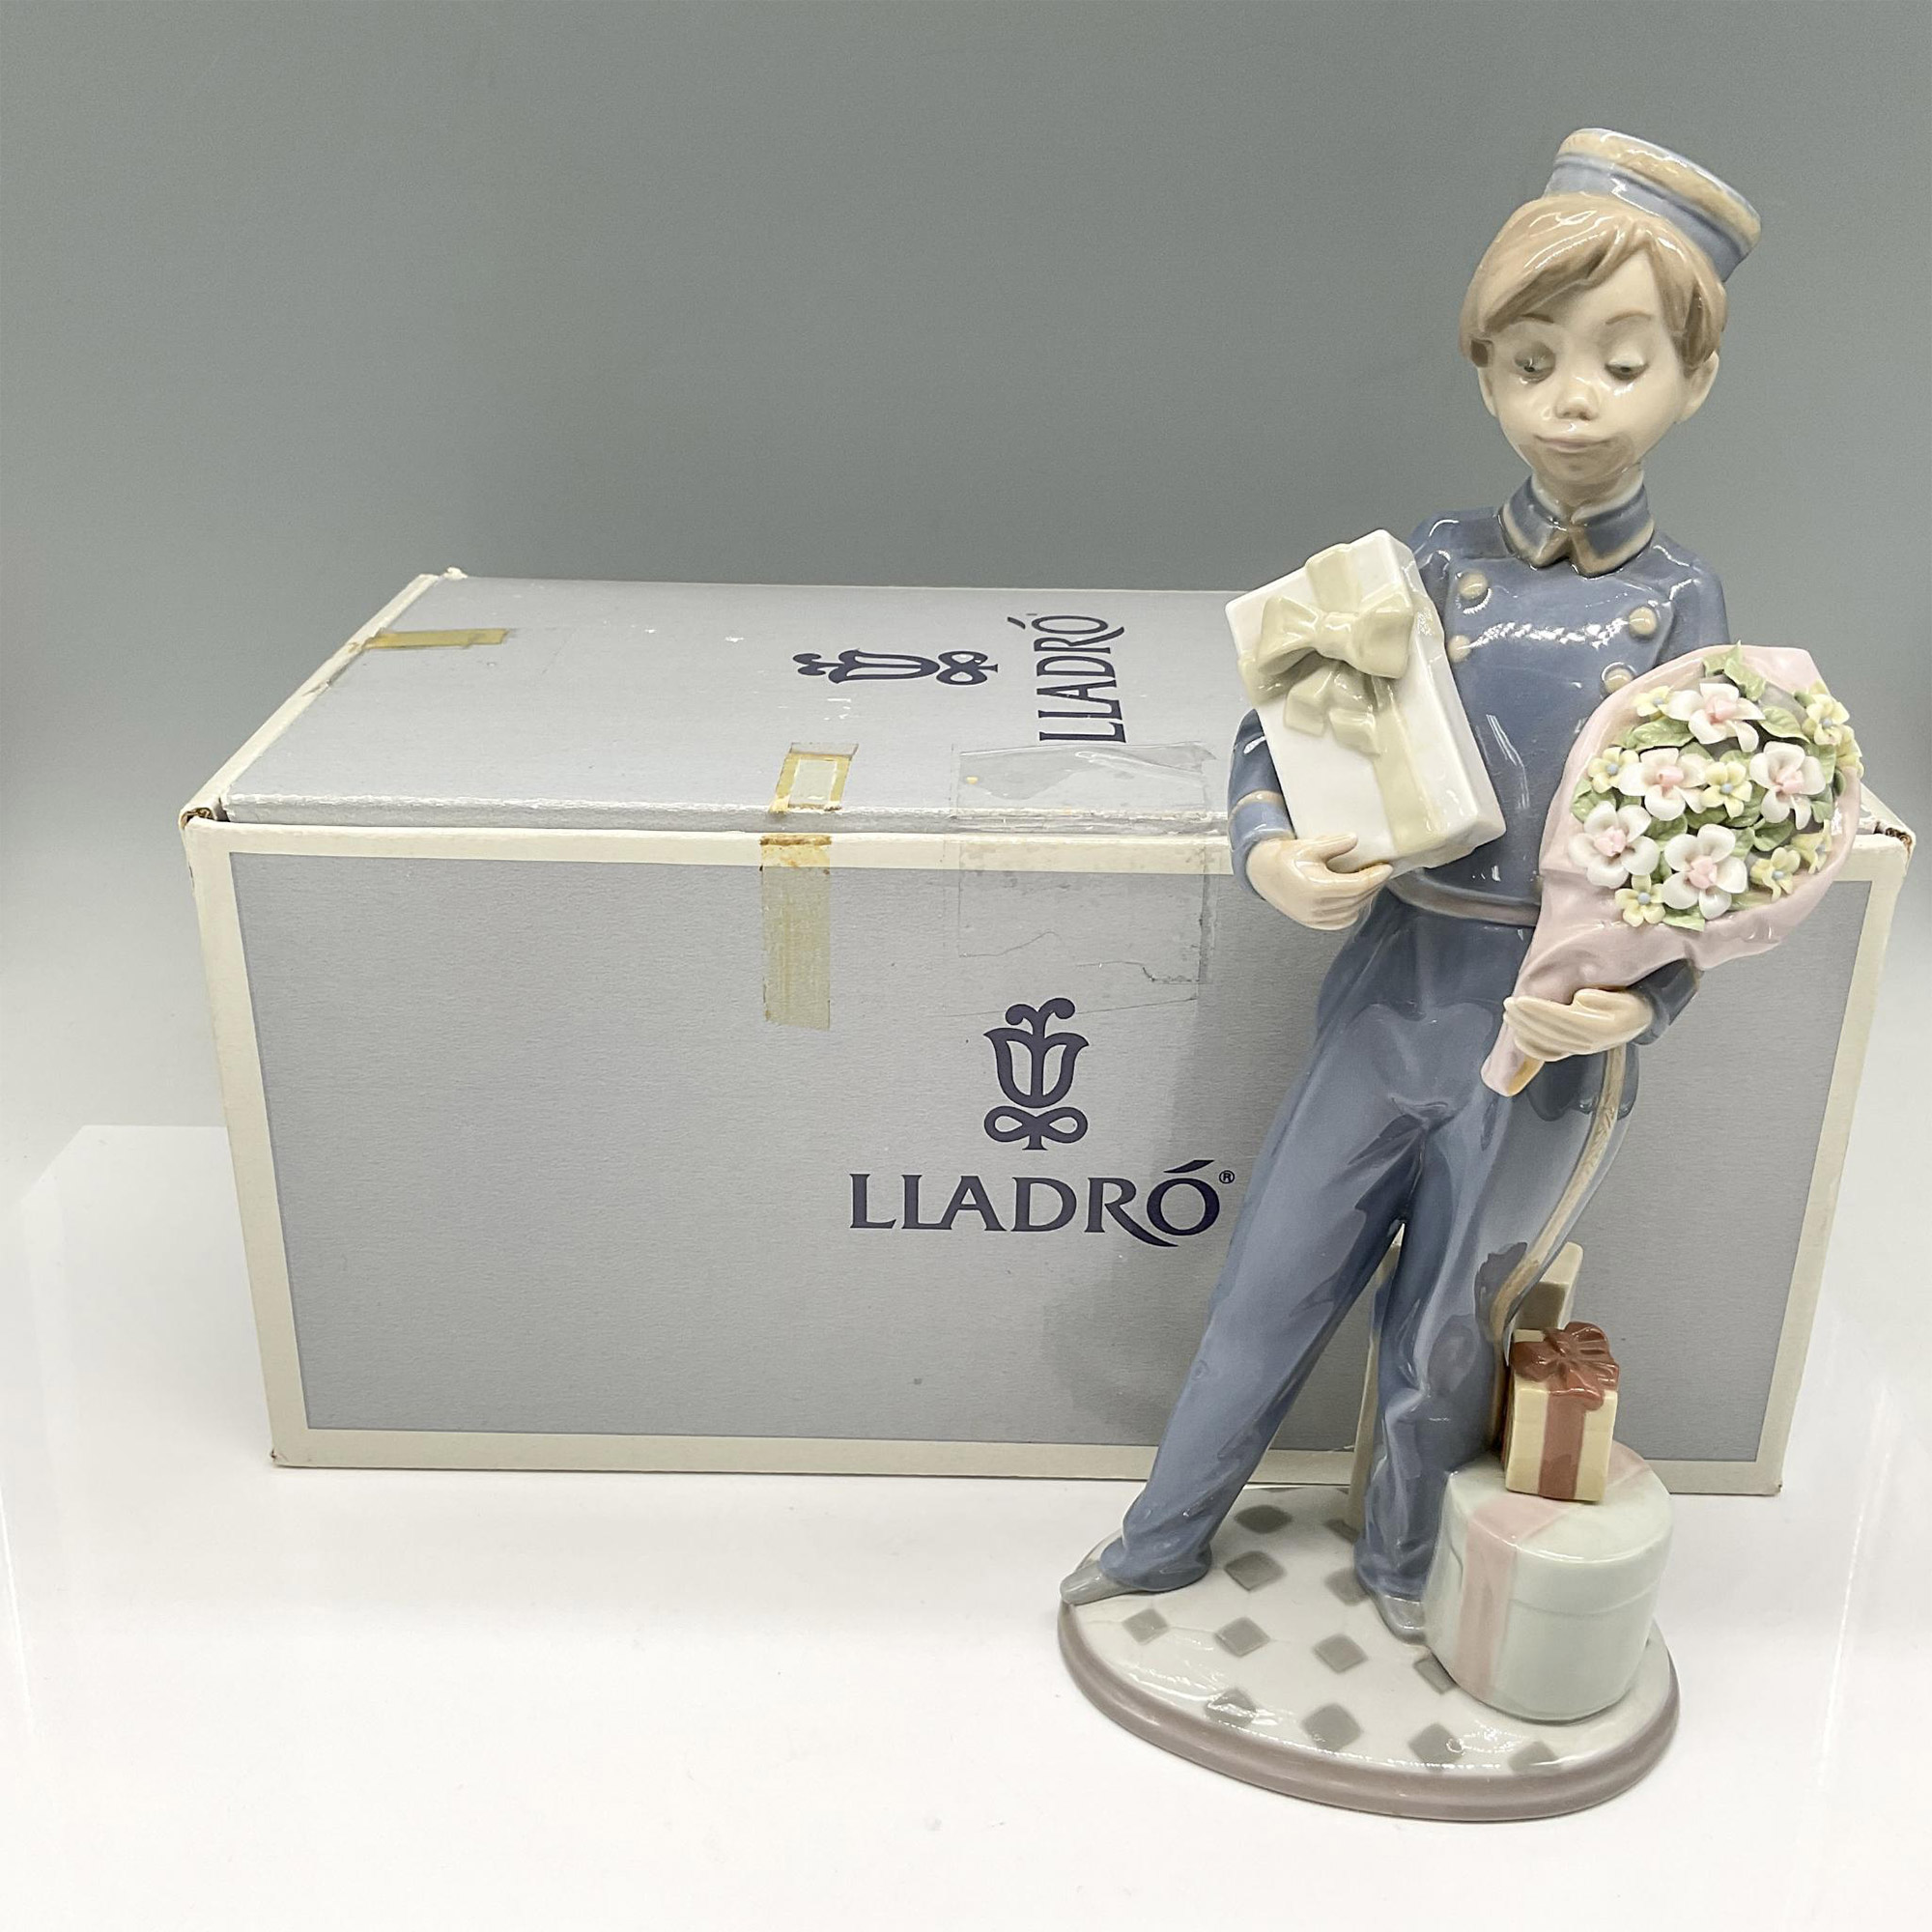 Special Delivery 1005783 - Lladro Porcelain Figurine - Image 5 of 5